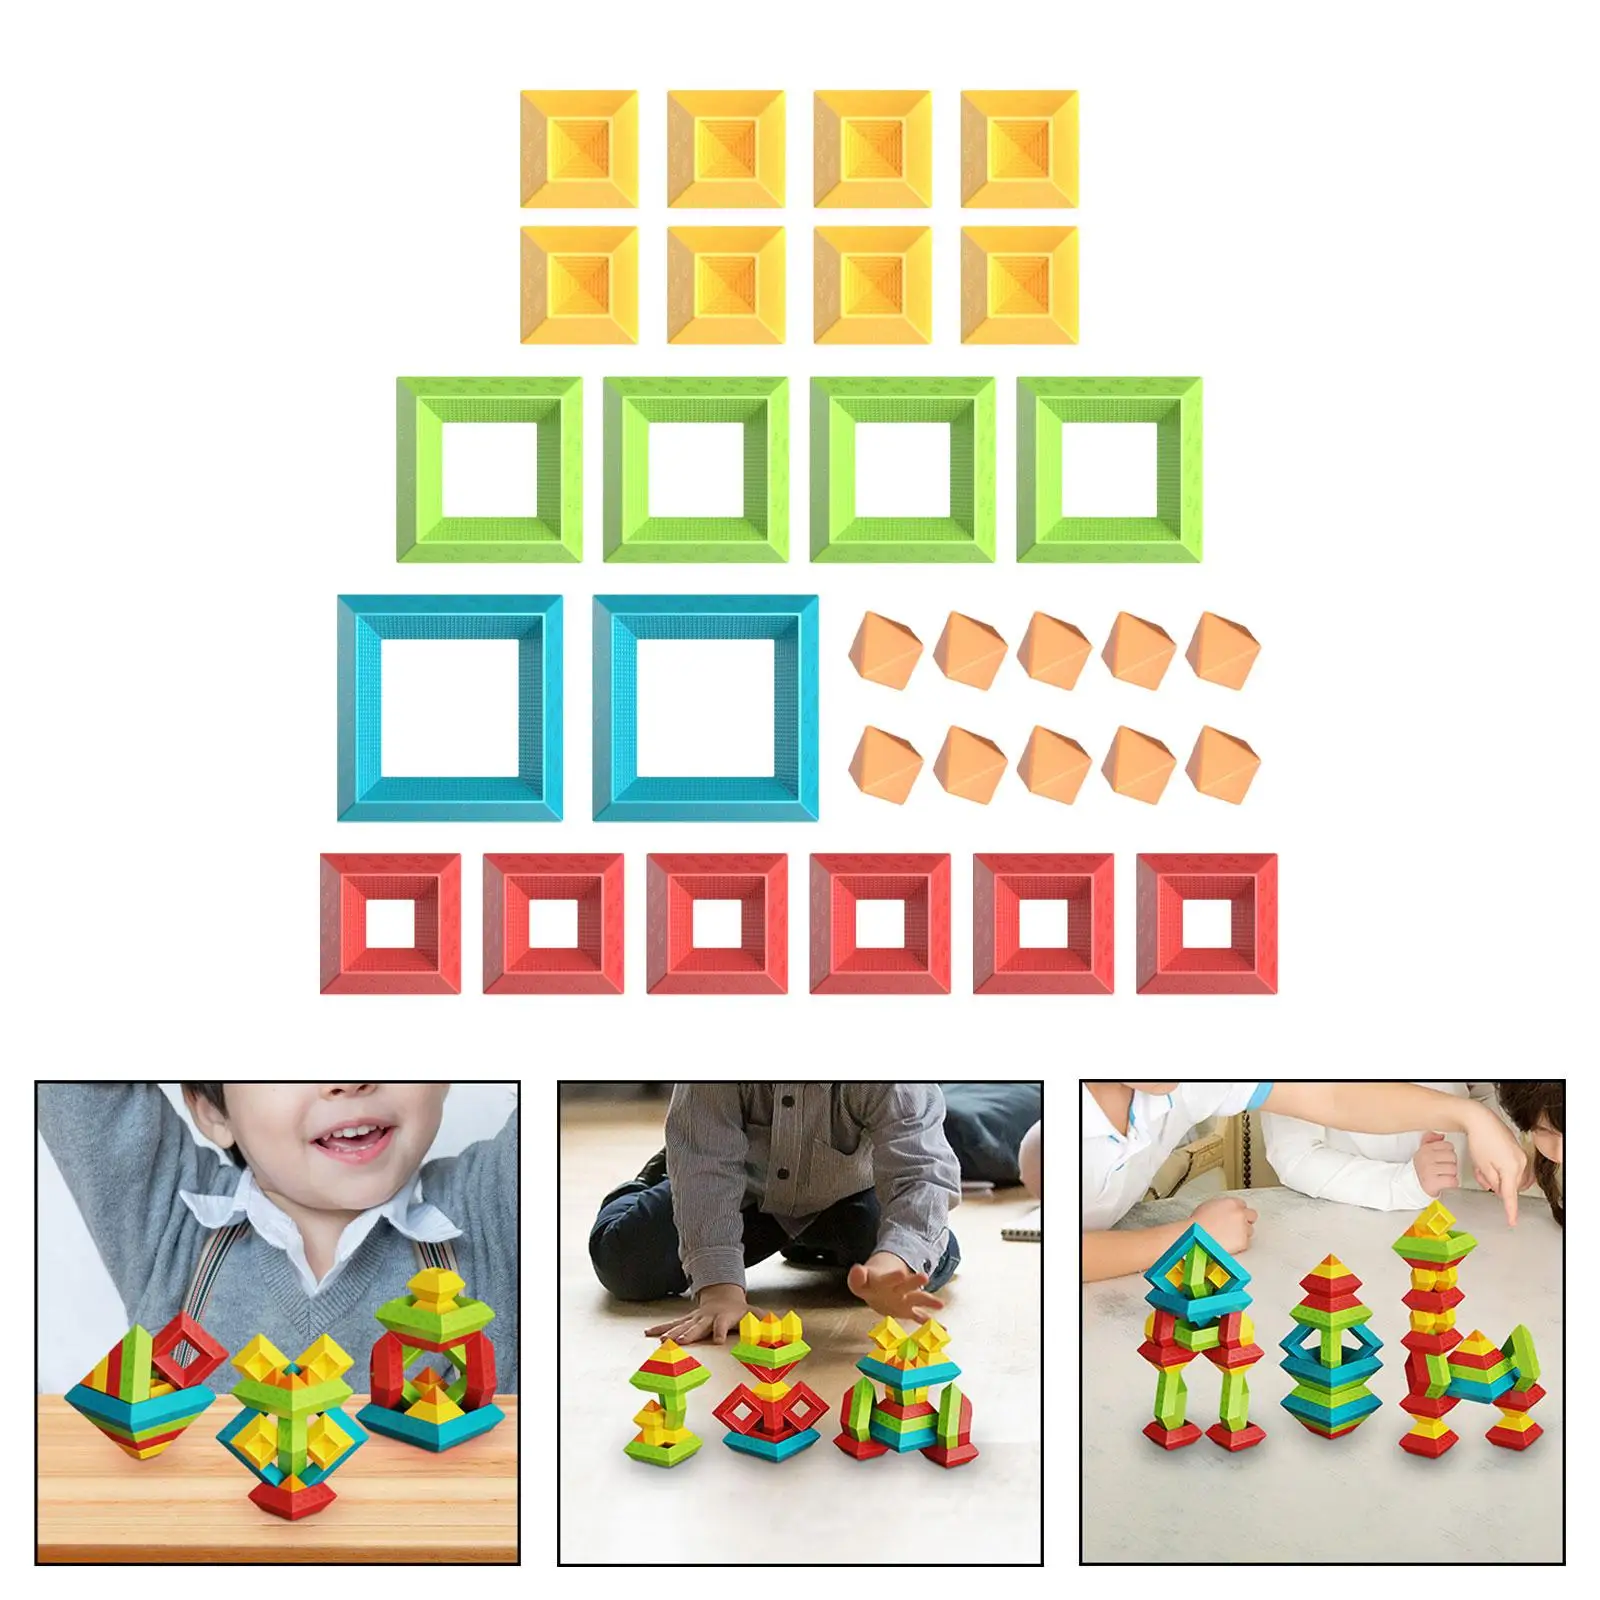 Building Blocks Educational Toys Preschool Stem Geometric Stacking Toy for Children Kids 1 2 3 4 5 Year Old Boys Girls Toddlers